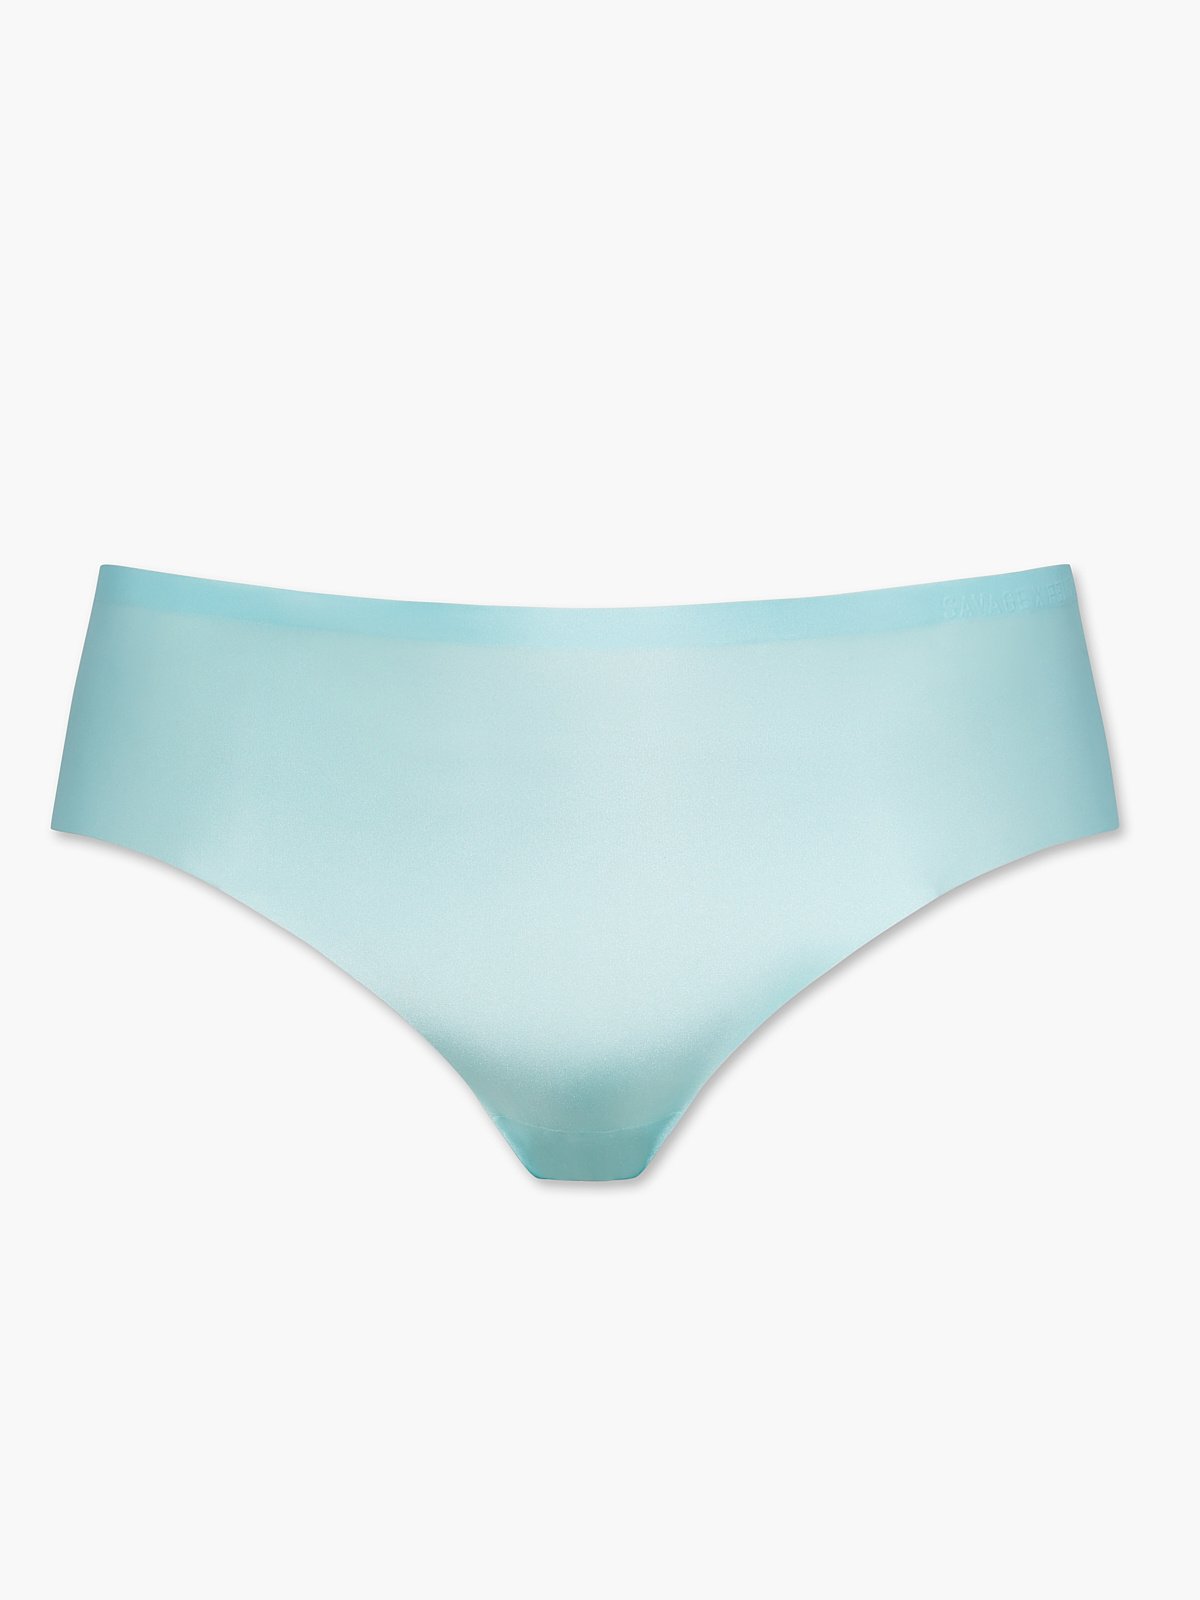 NEW Microfiber No-Show Hipster Panty in Blue